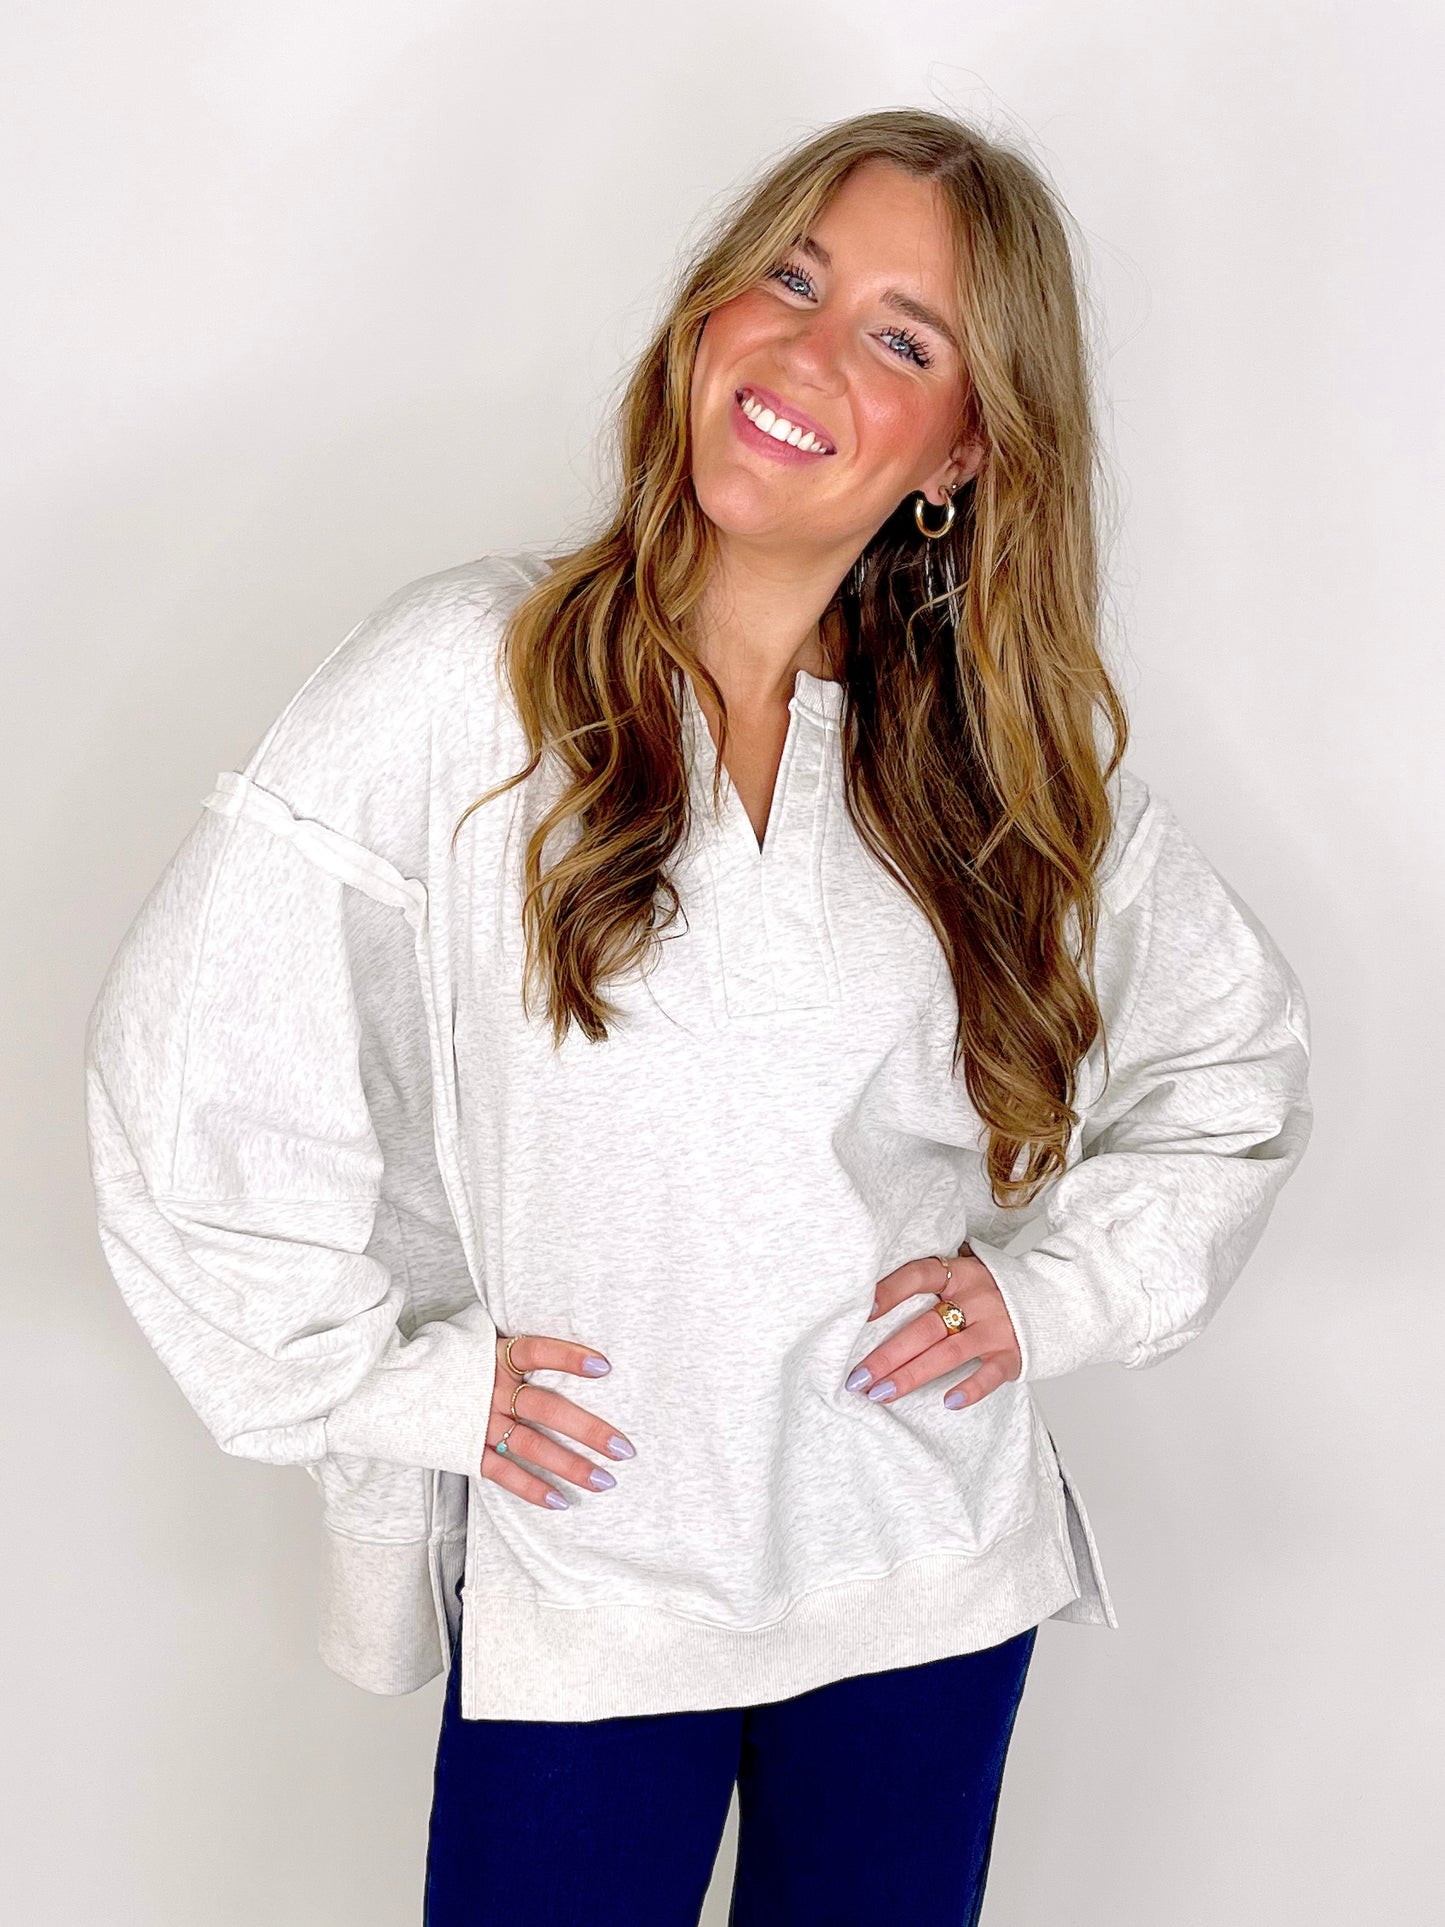 The Reagan Sweatshirt-Sweatshirt-First Love-The Village Shoppe, Women’s Fashion Boutique, Shop Online and In Store - Located in Muscle Shoals, AL.